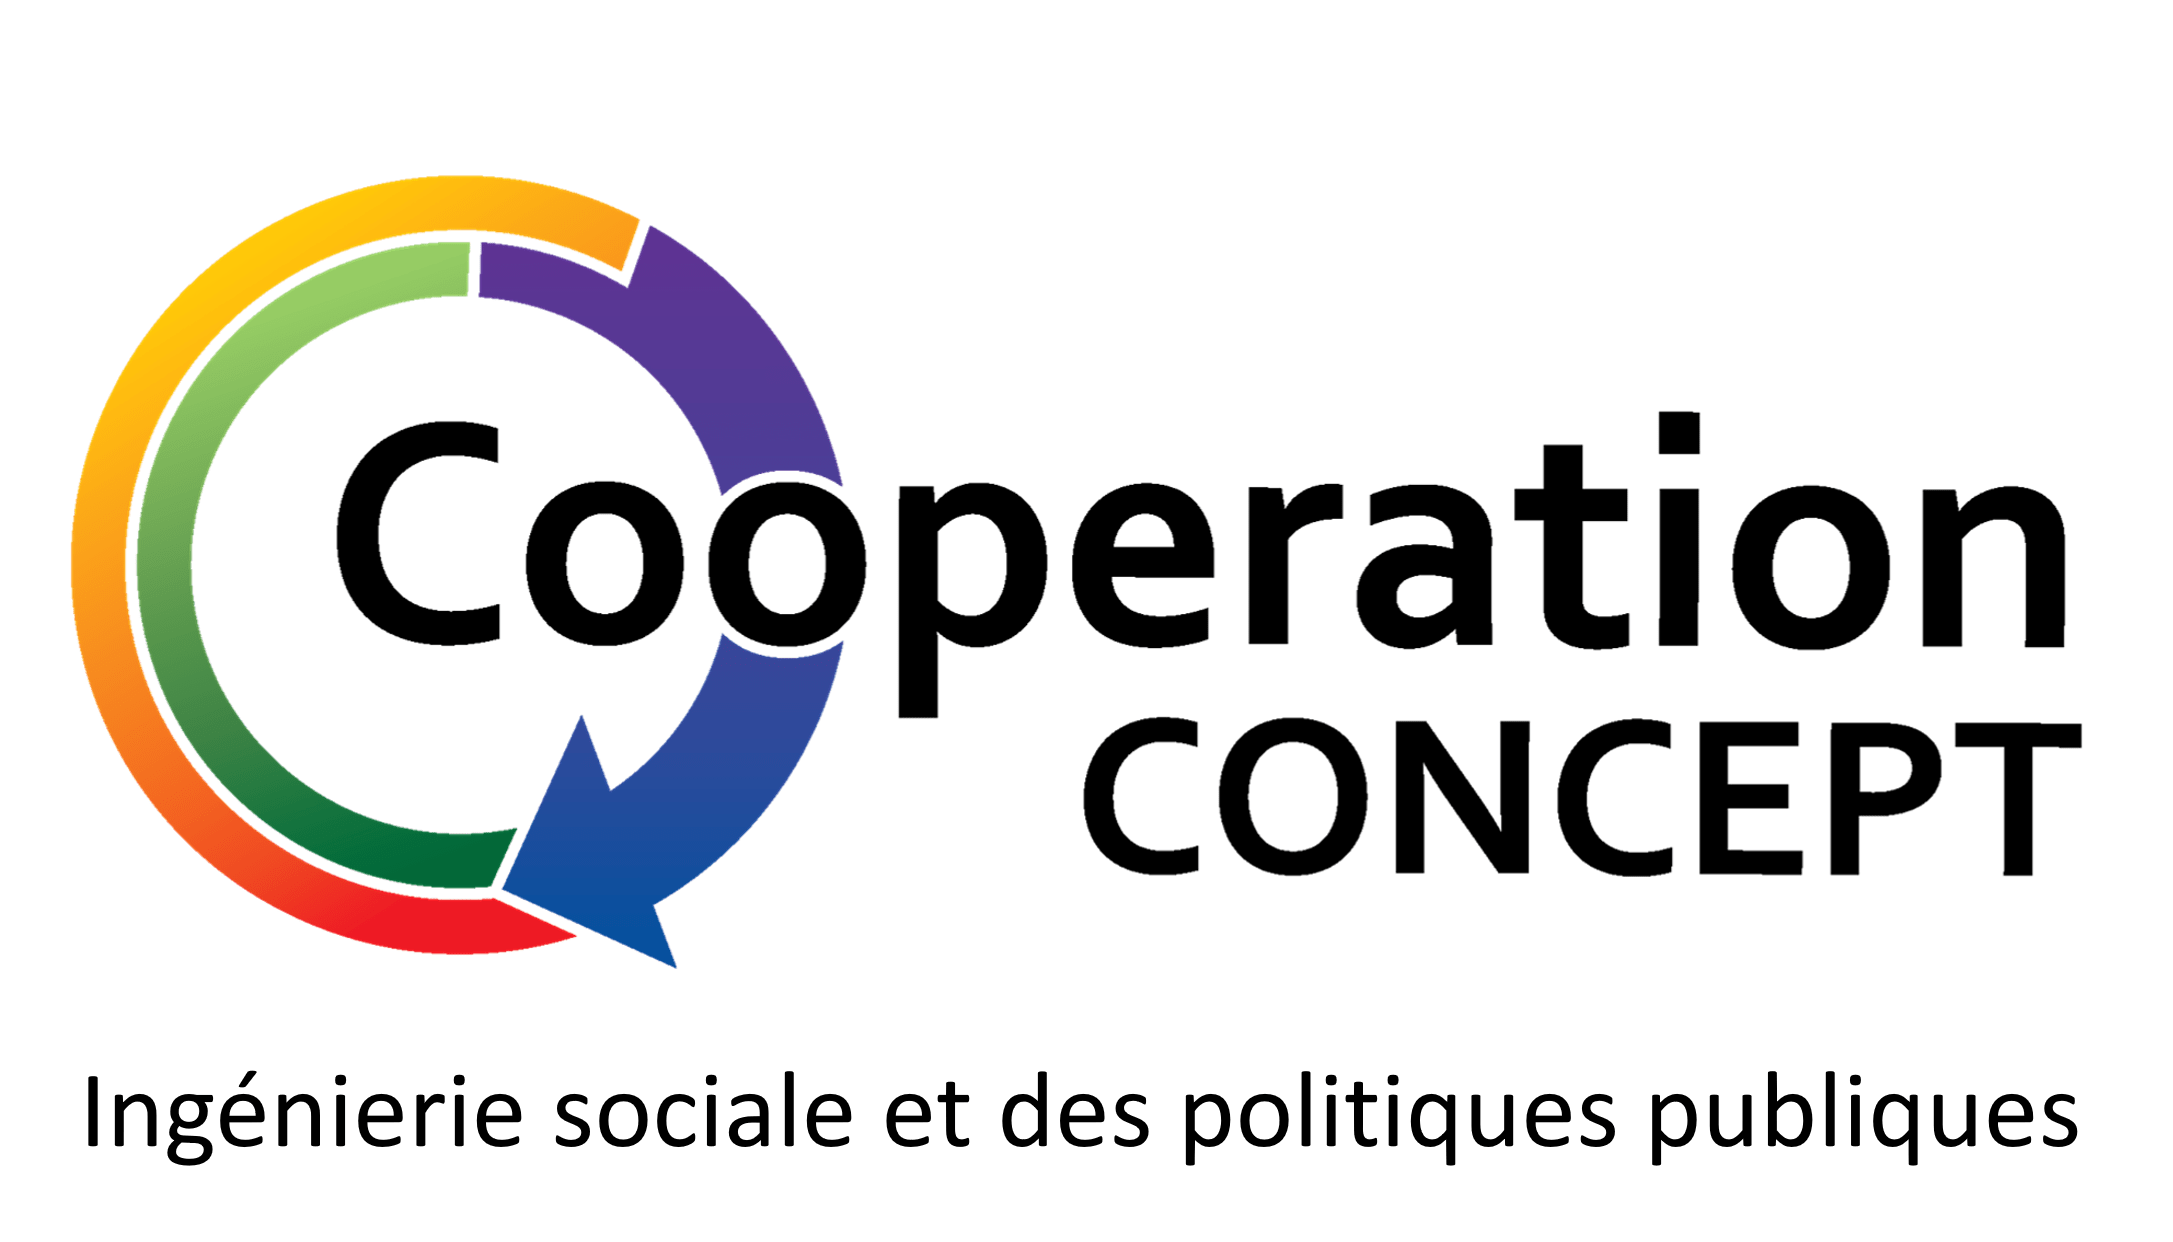 Cooperation Concept